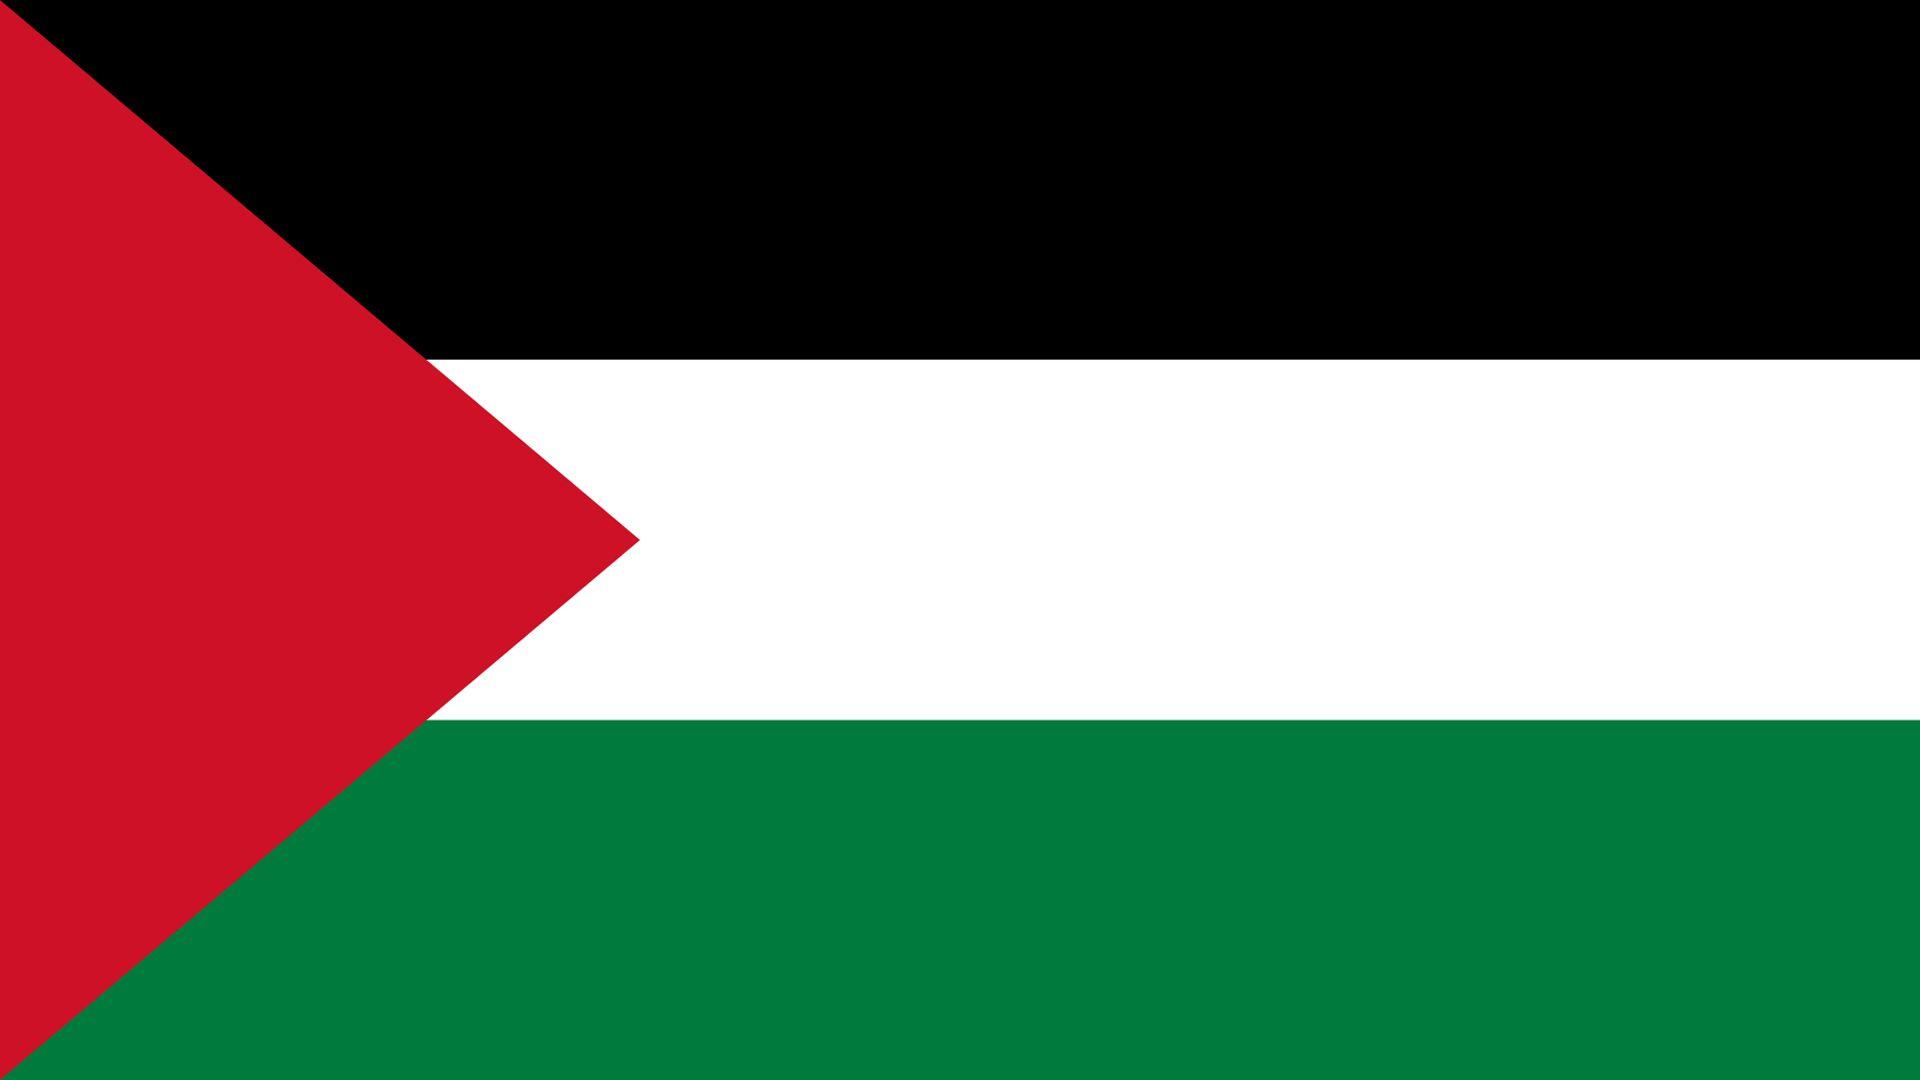 Palestine Flag, High Definition, High Quality, Widescreen